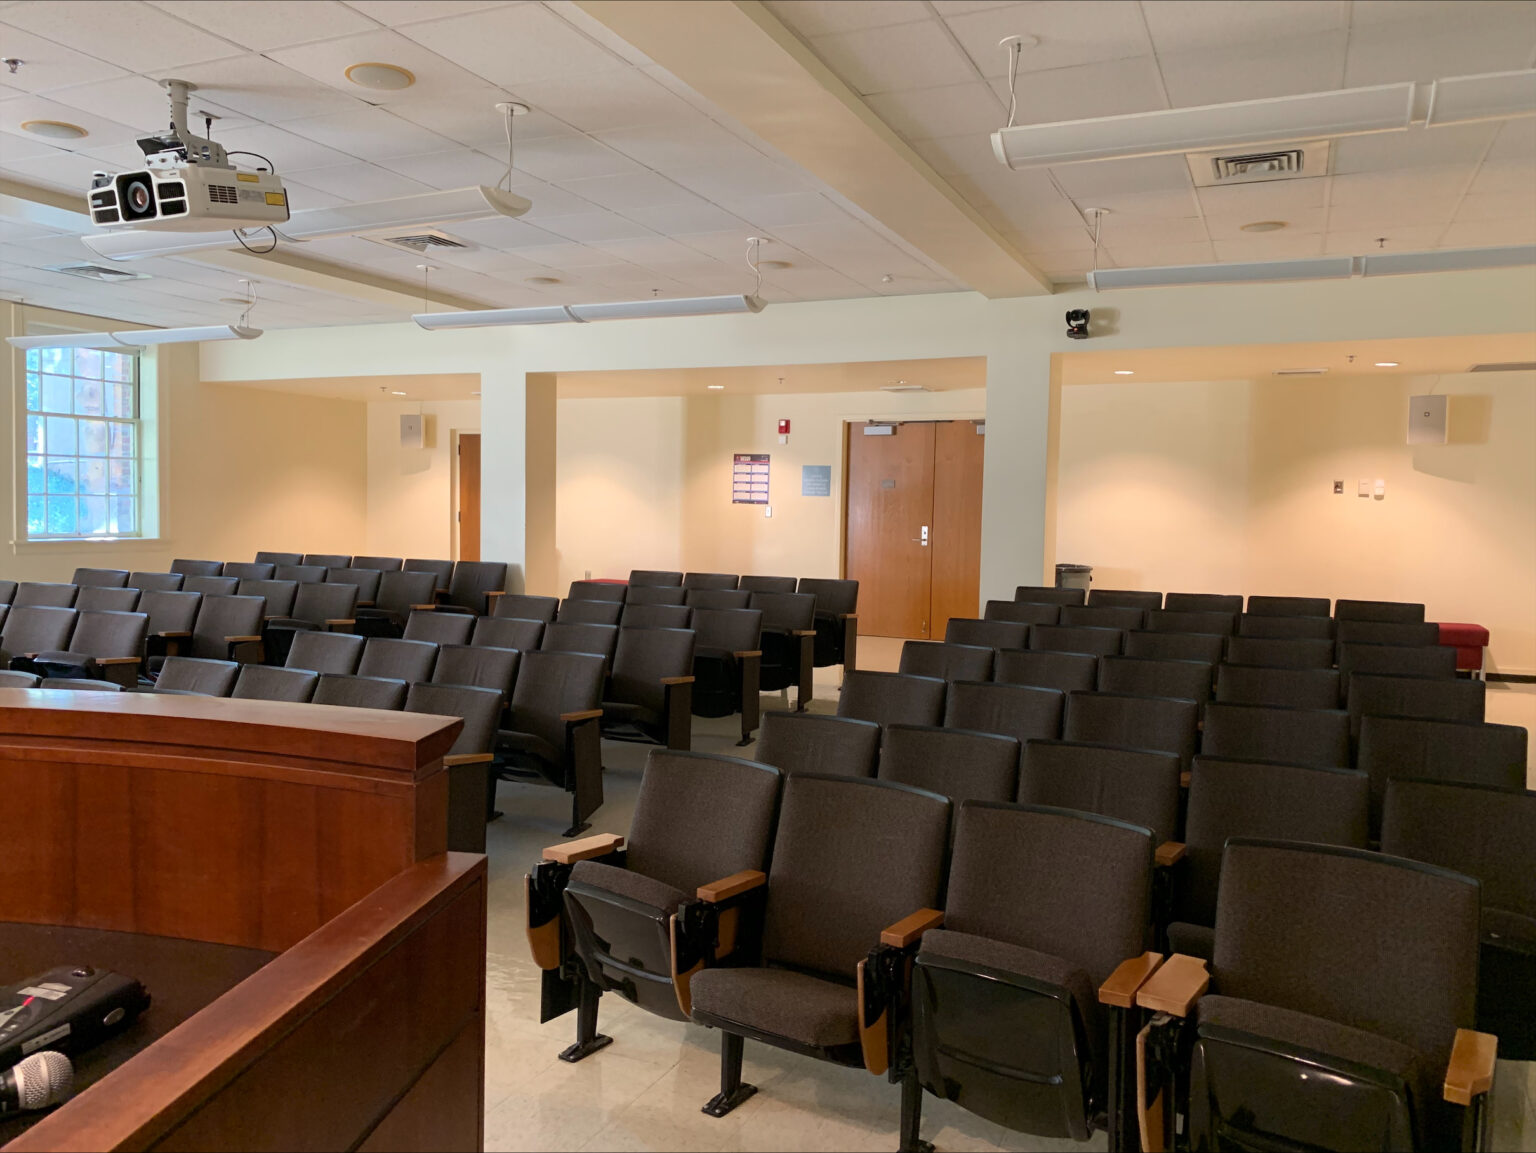 Interior of a seminar room, from the perspective of a lectern.